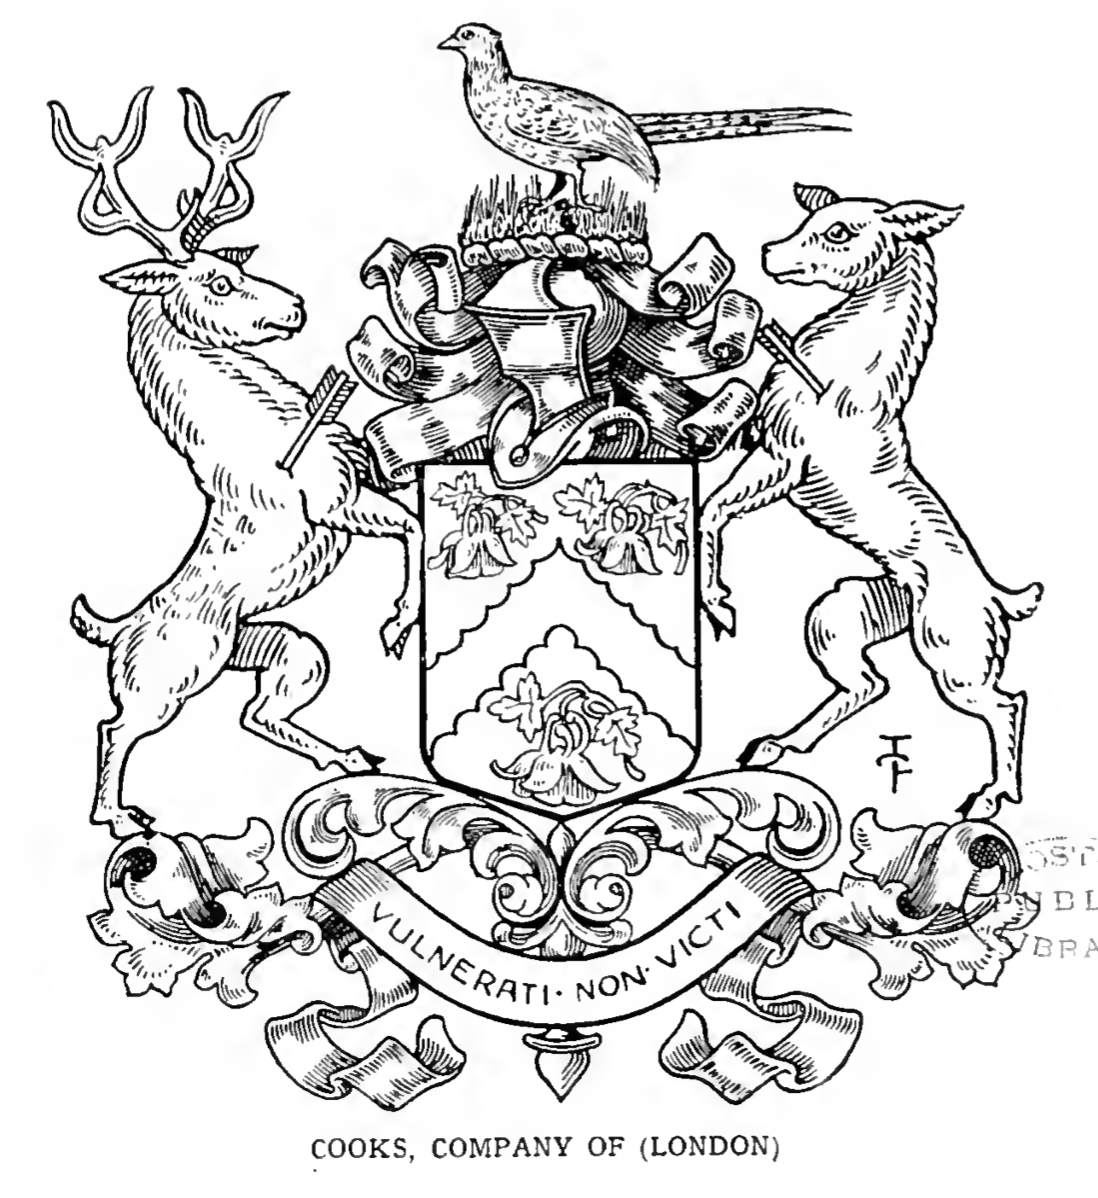 COOKS, The Worshipful Company of (London).